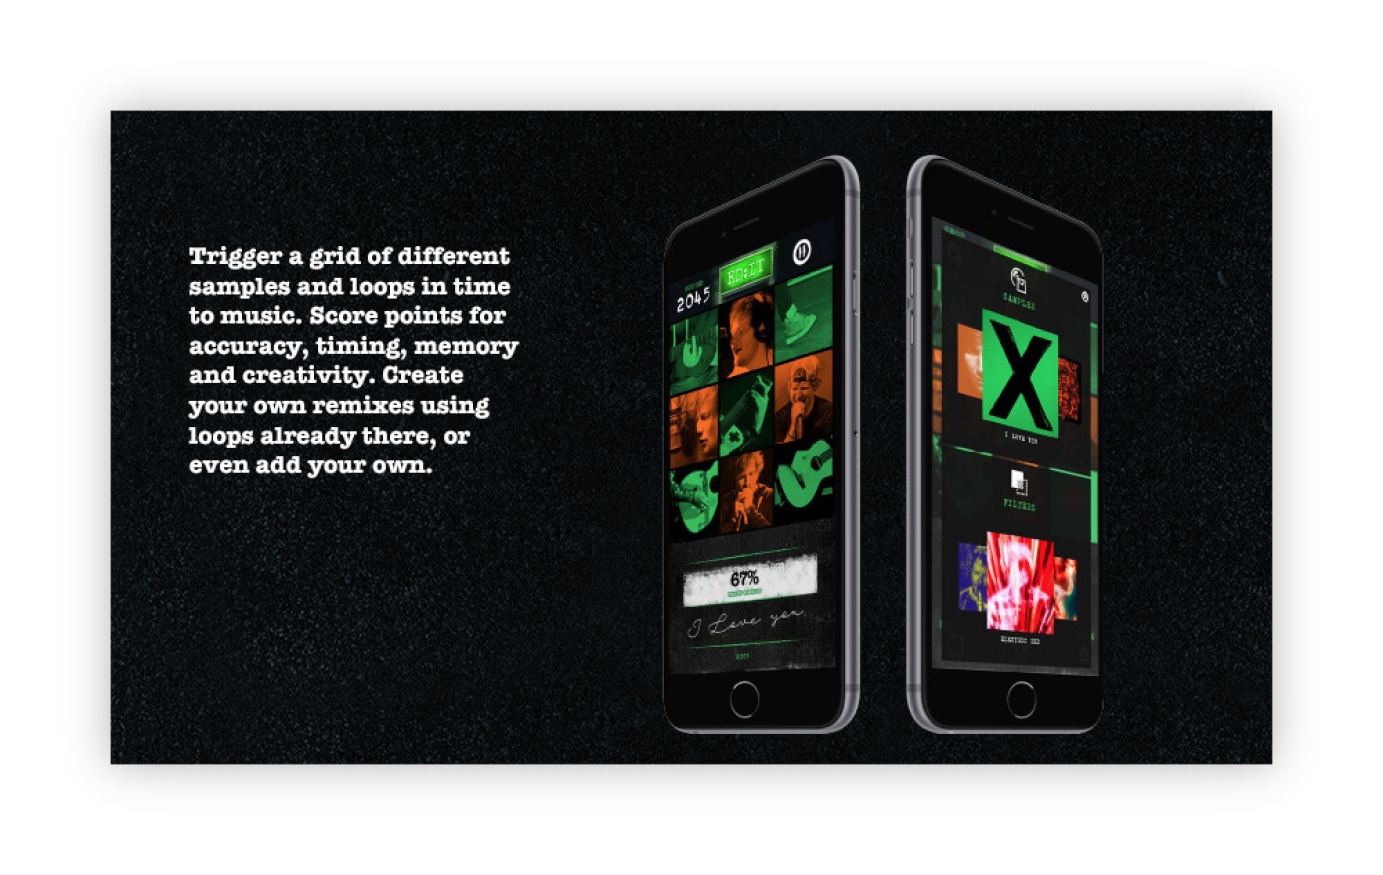 Apps and games for Ed Sheeran, Warner Music by Condor